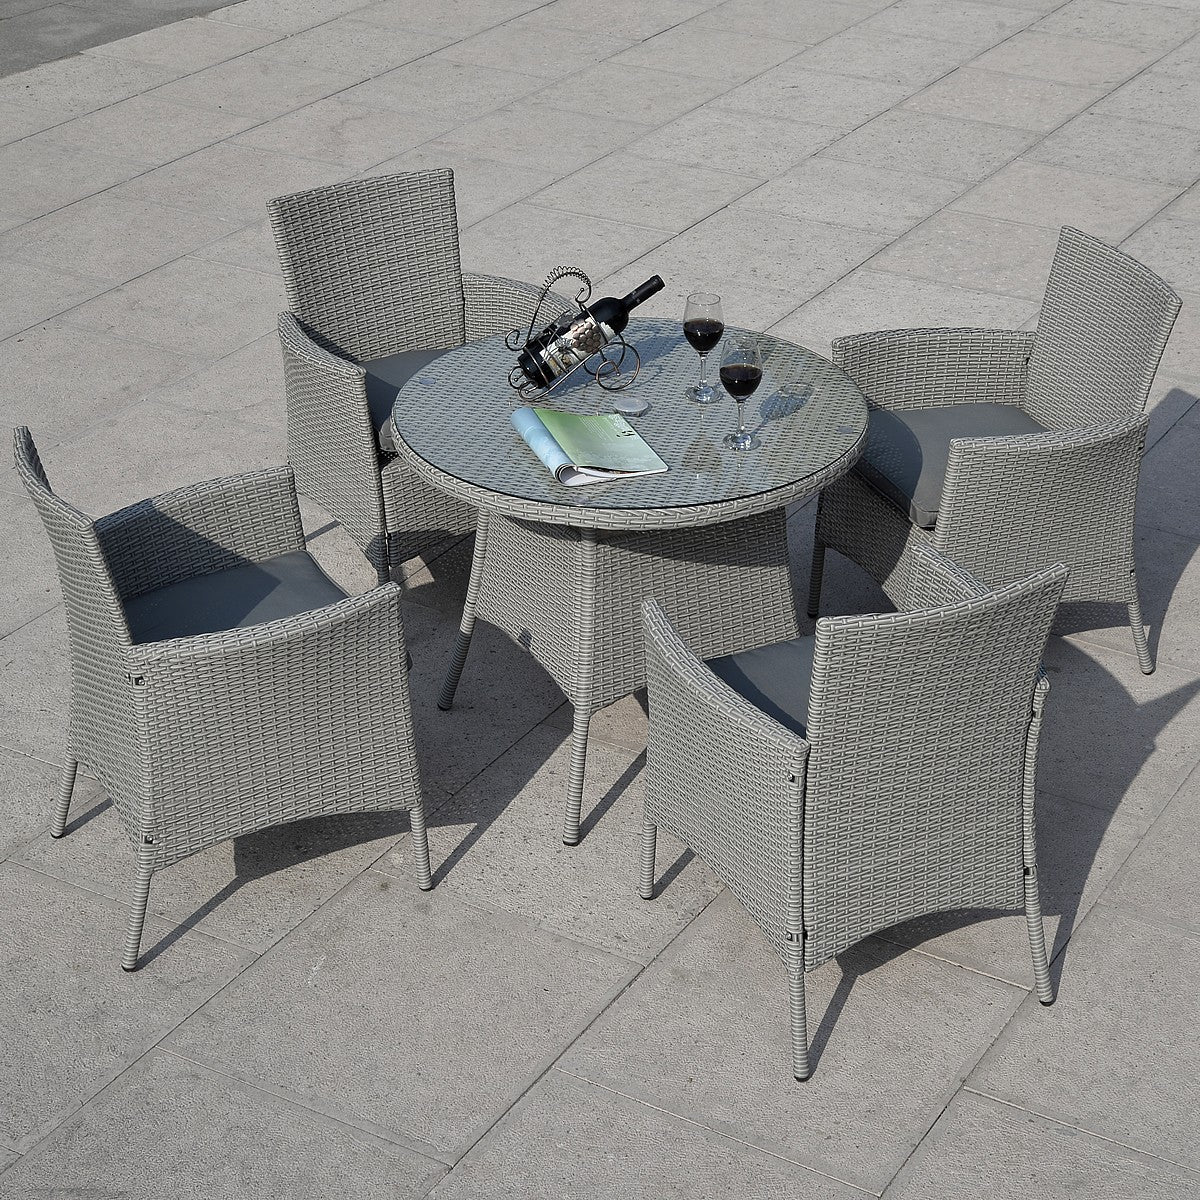 5 Pcs Patio Rattan Dining Table And 4 Chairs Set Ajl Home